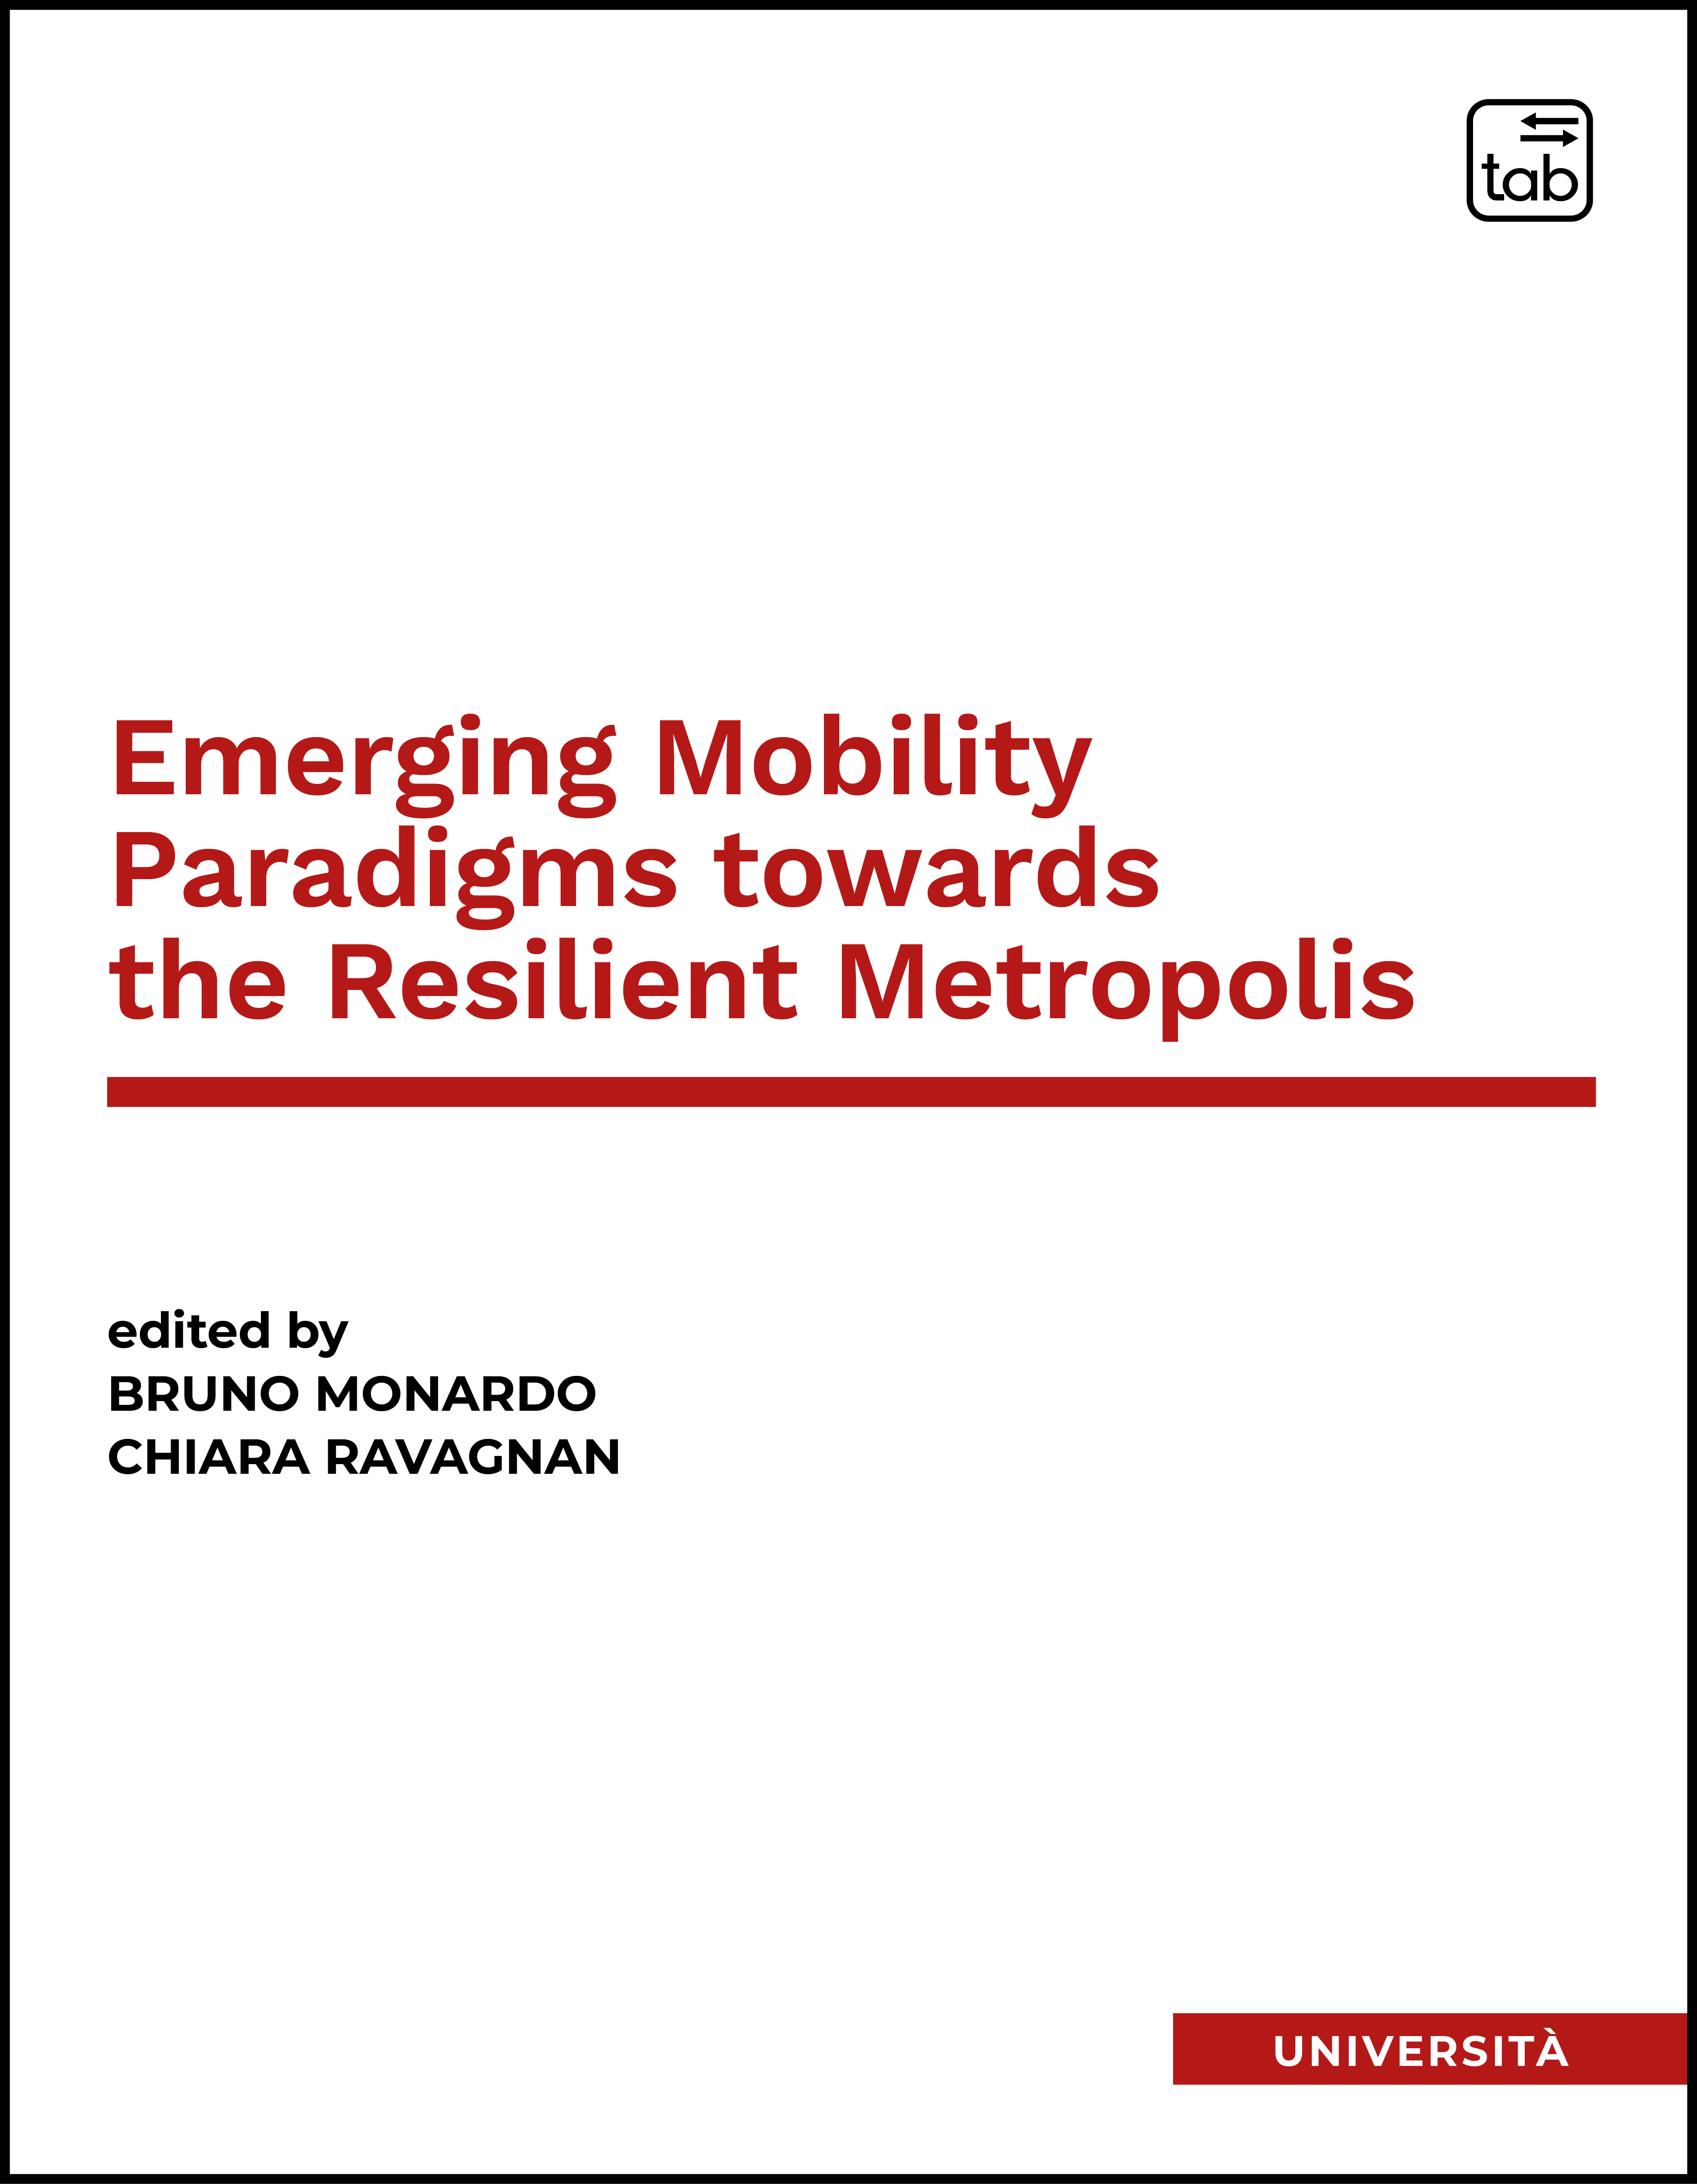 Emerging Mobility Paradigms towards the Resilient Metropolis